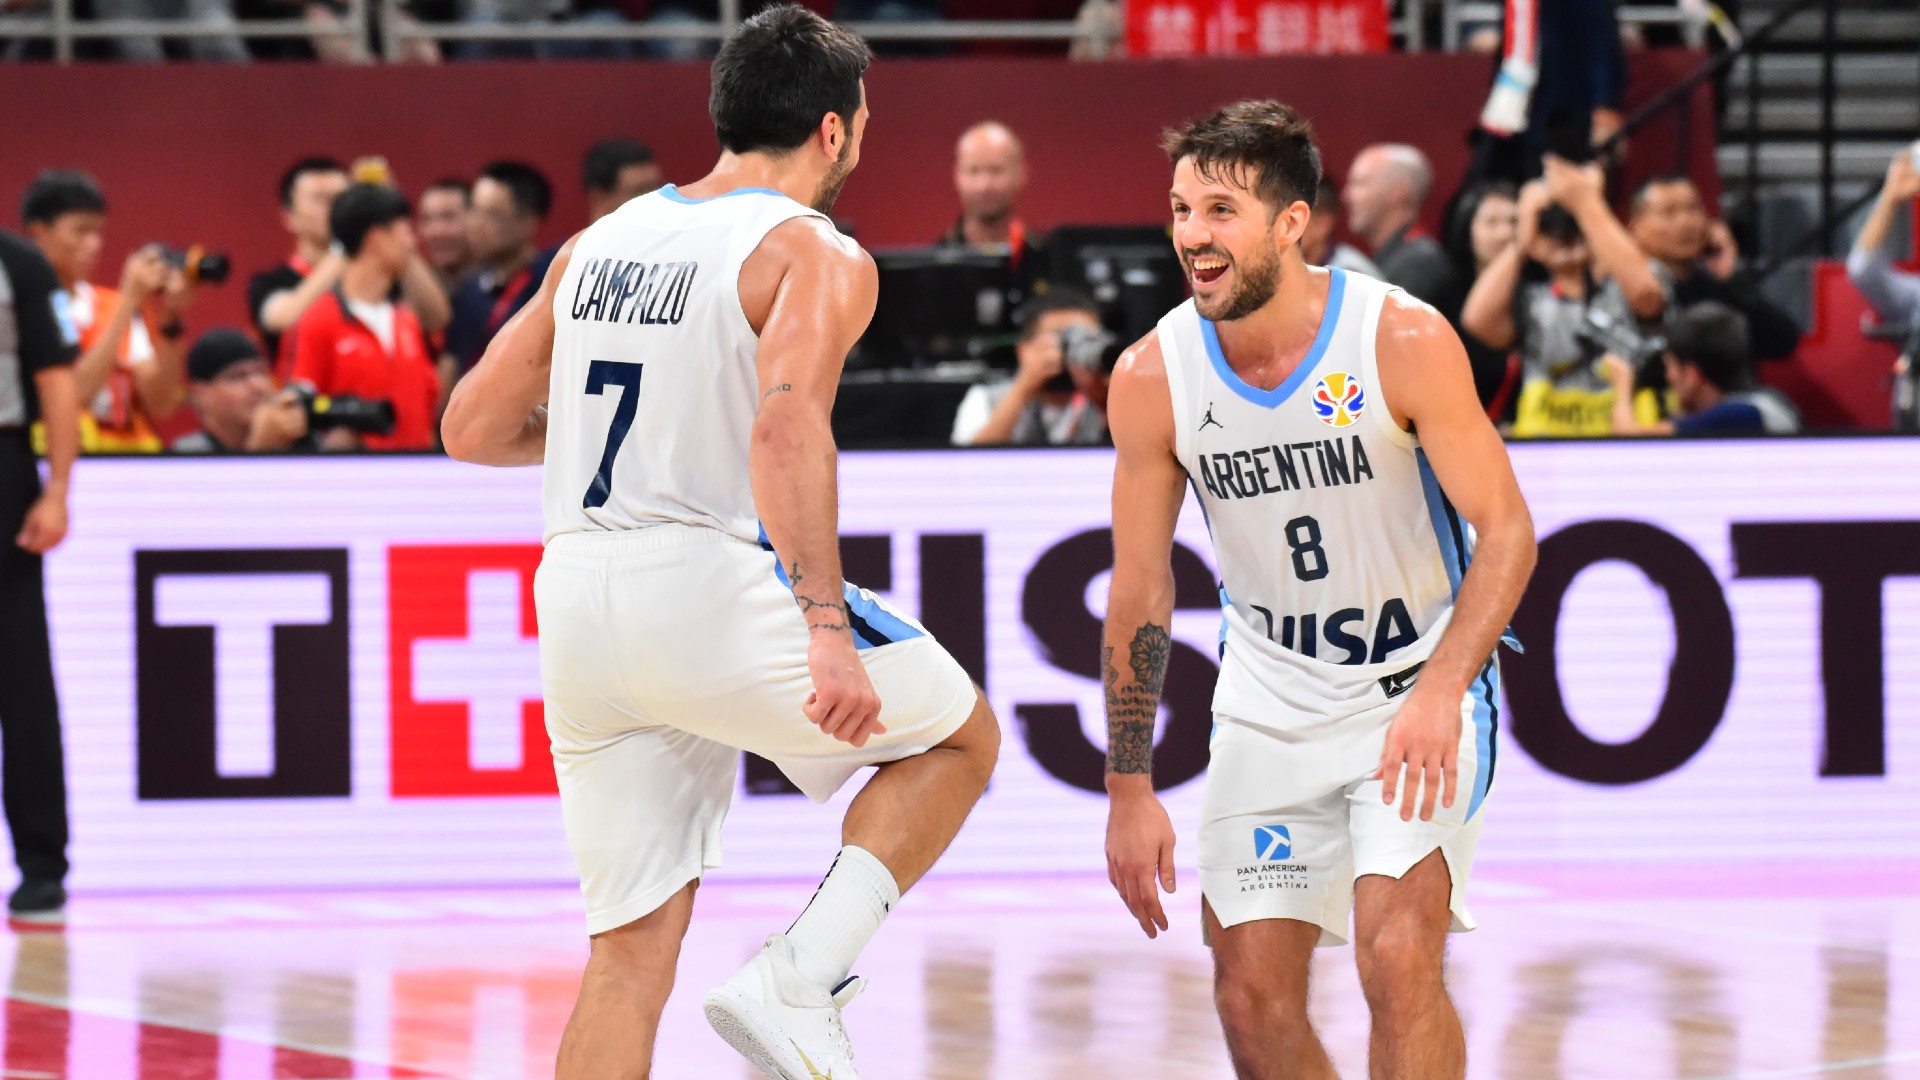 The Argentine National Team faces Australia at the start of